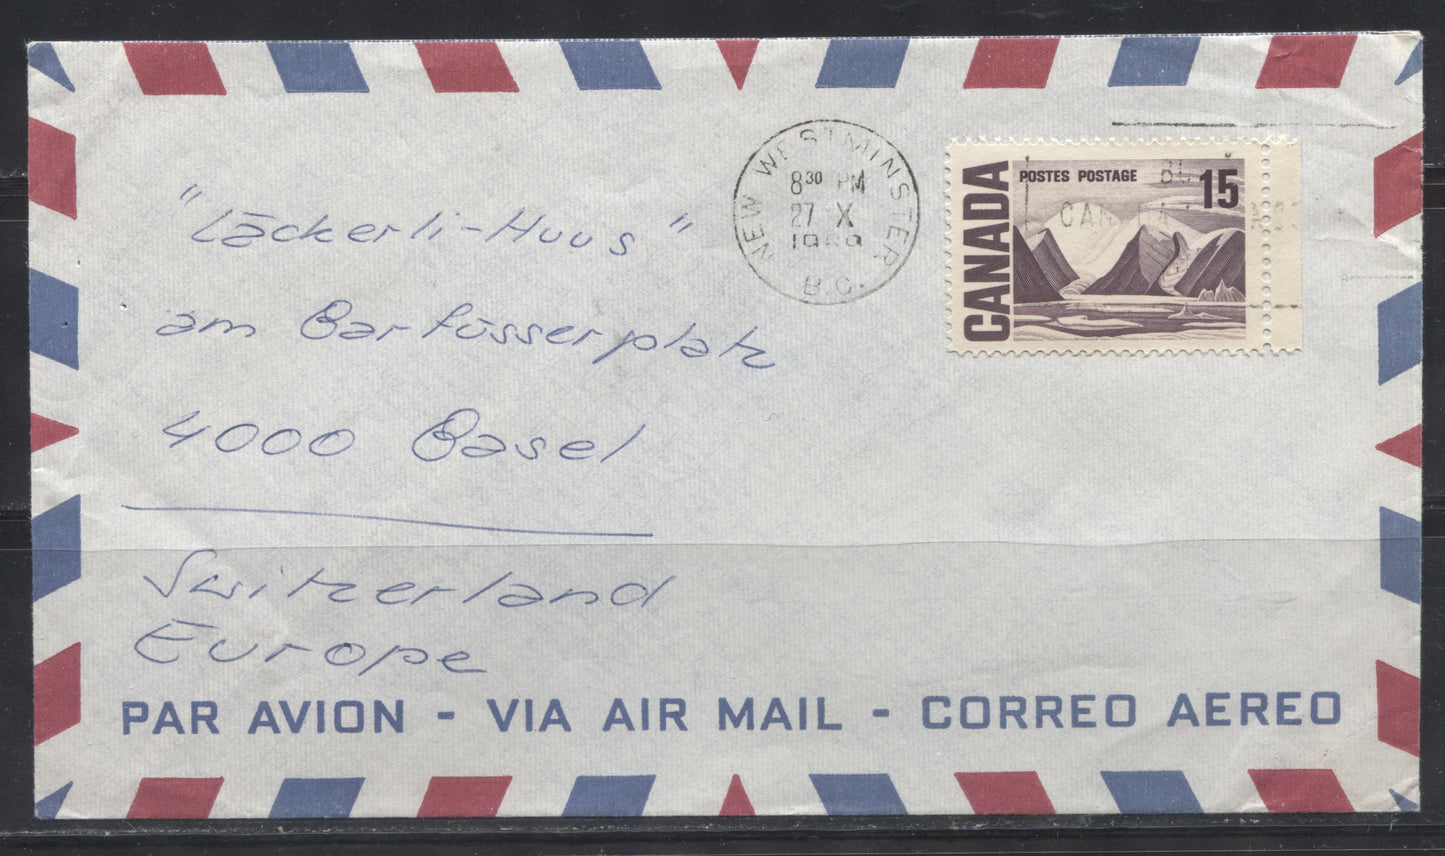 Lot 106 Canada #463vi 15c Dull Reddish Violet Greenland Mountains, 1967-1973 Centennial Definitive Issue, Single Usage of the DF Plastic Flow Variety on October 1969 Airmail Cover to Switzerland